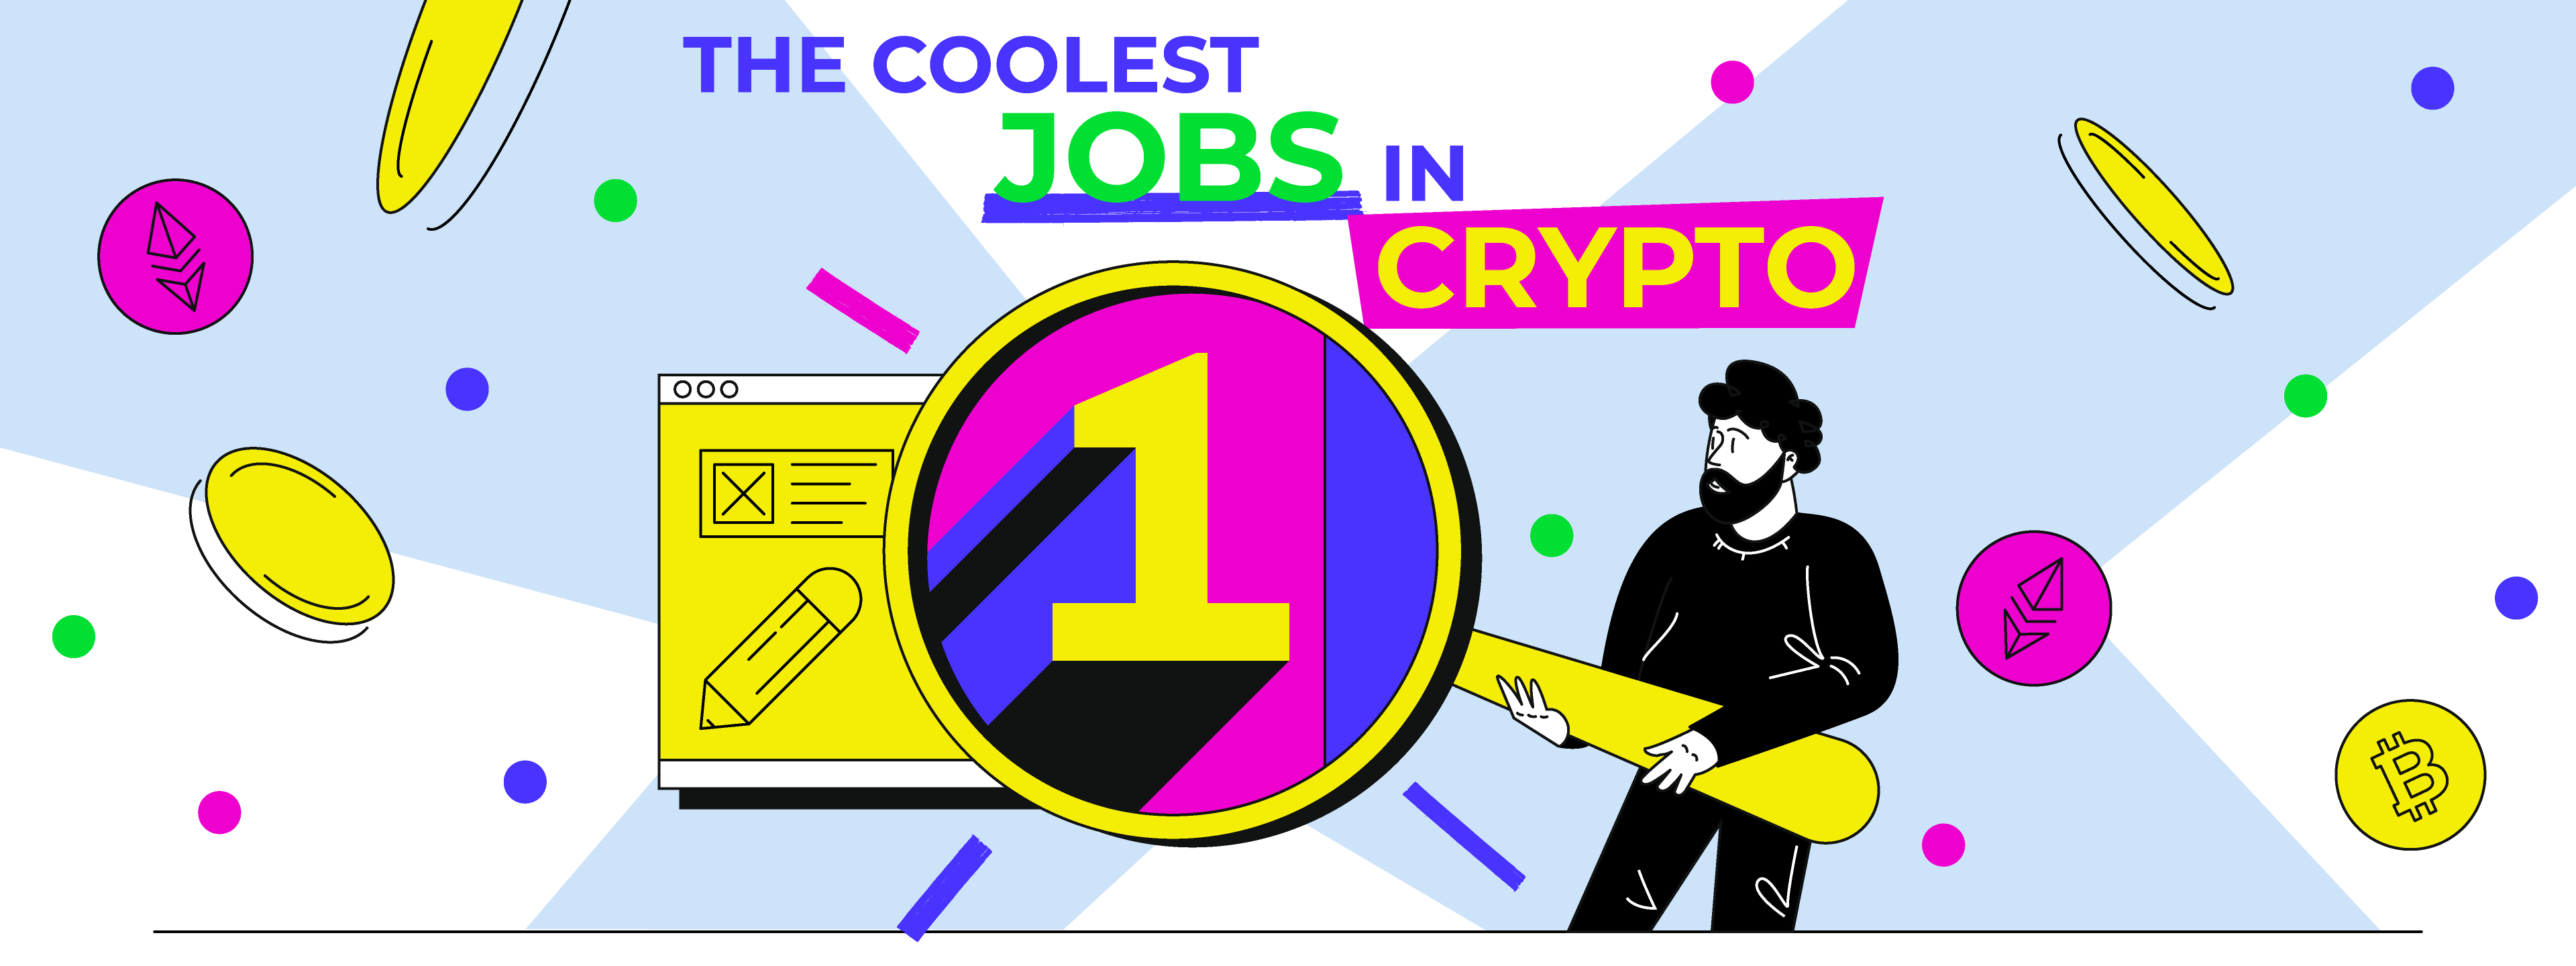 The Coolest Jobs in Crypto 